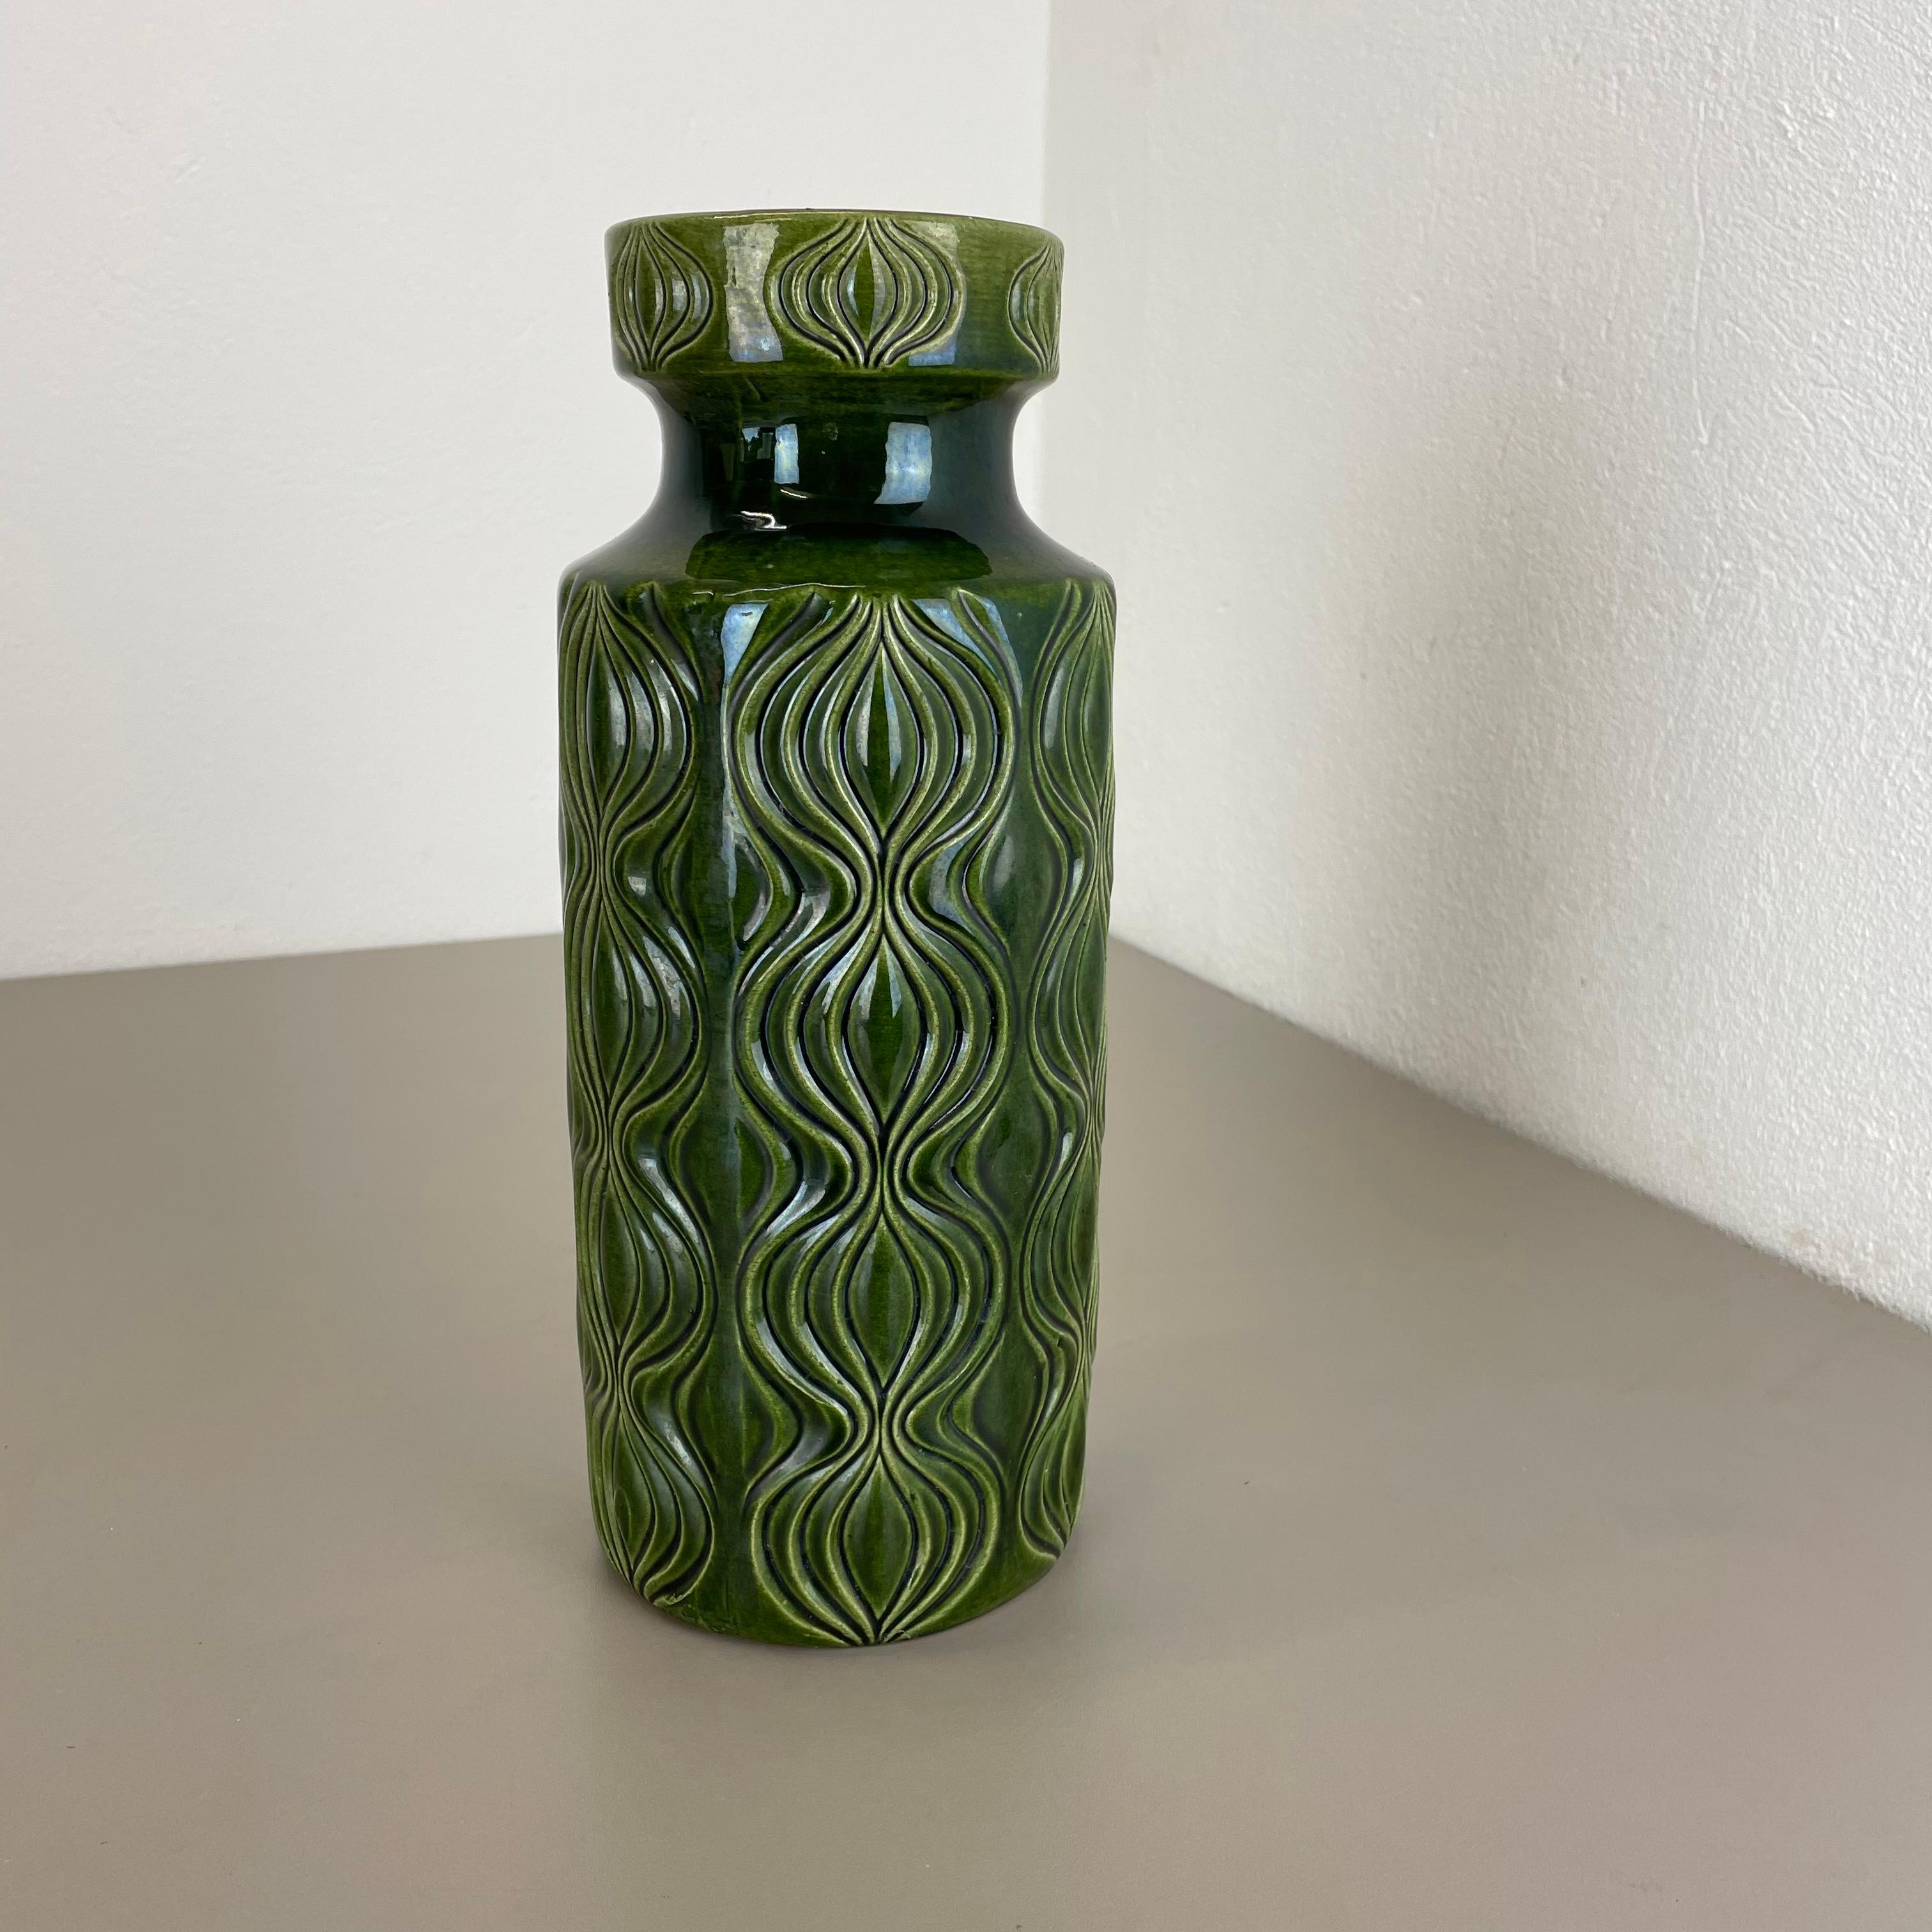 Article:

Fat lava art vase


Producer:

Scheurich, Germany


Design:

Nr. 285-30



Decade:

1970s


Description:

This original vintage vase was produced in the 1970s in Germany. It is made of porcelain in fat lava optic.